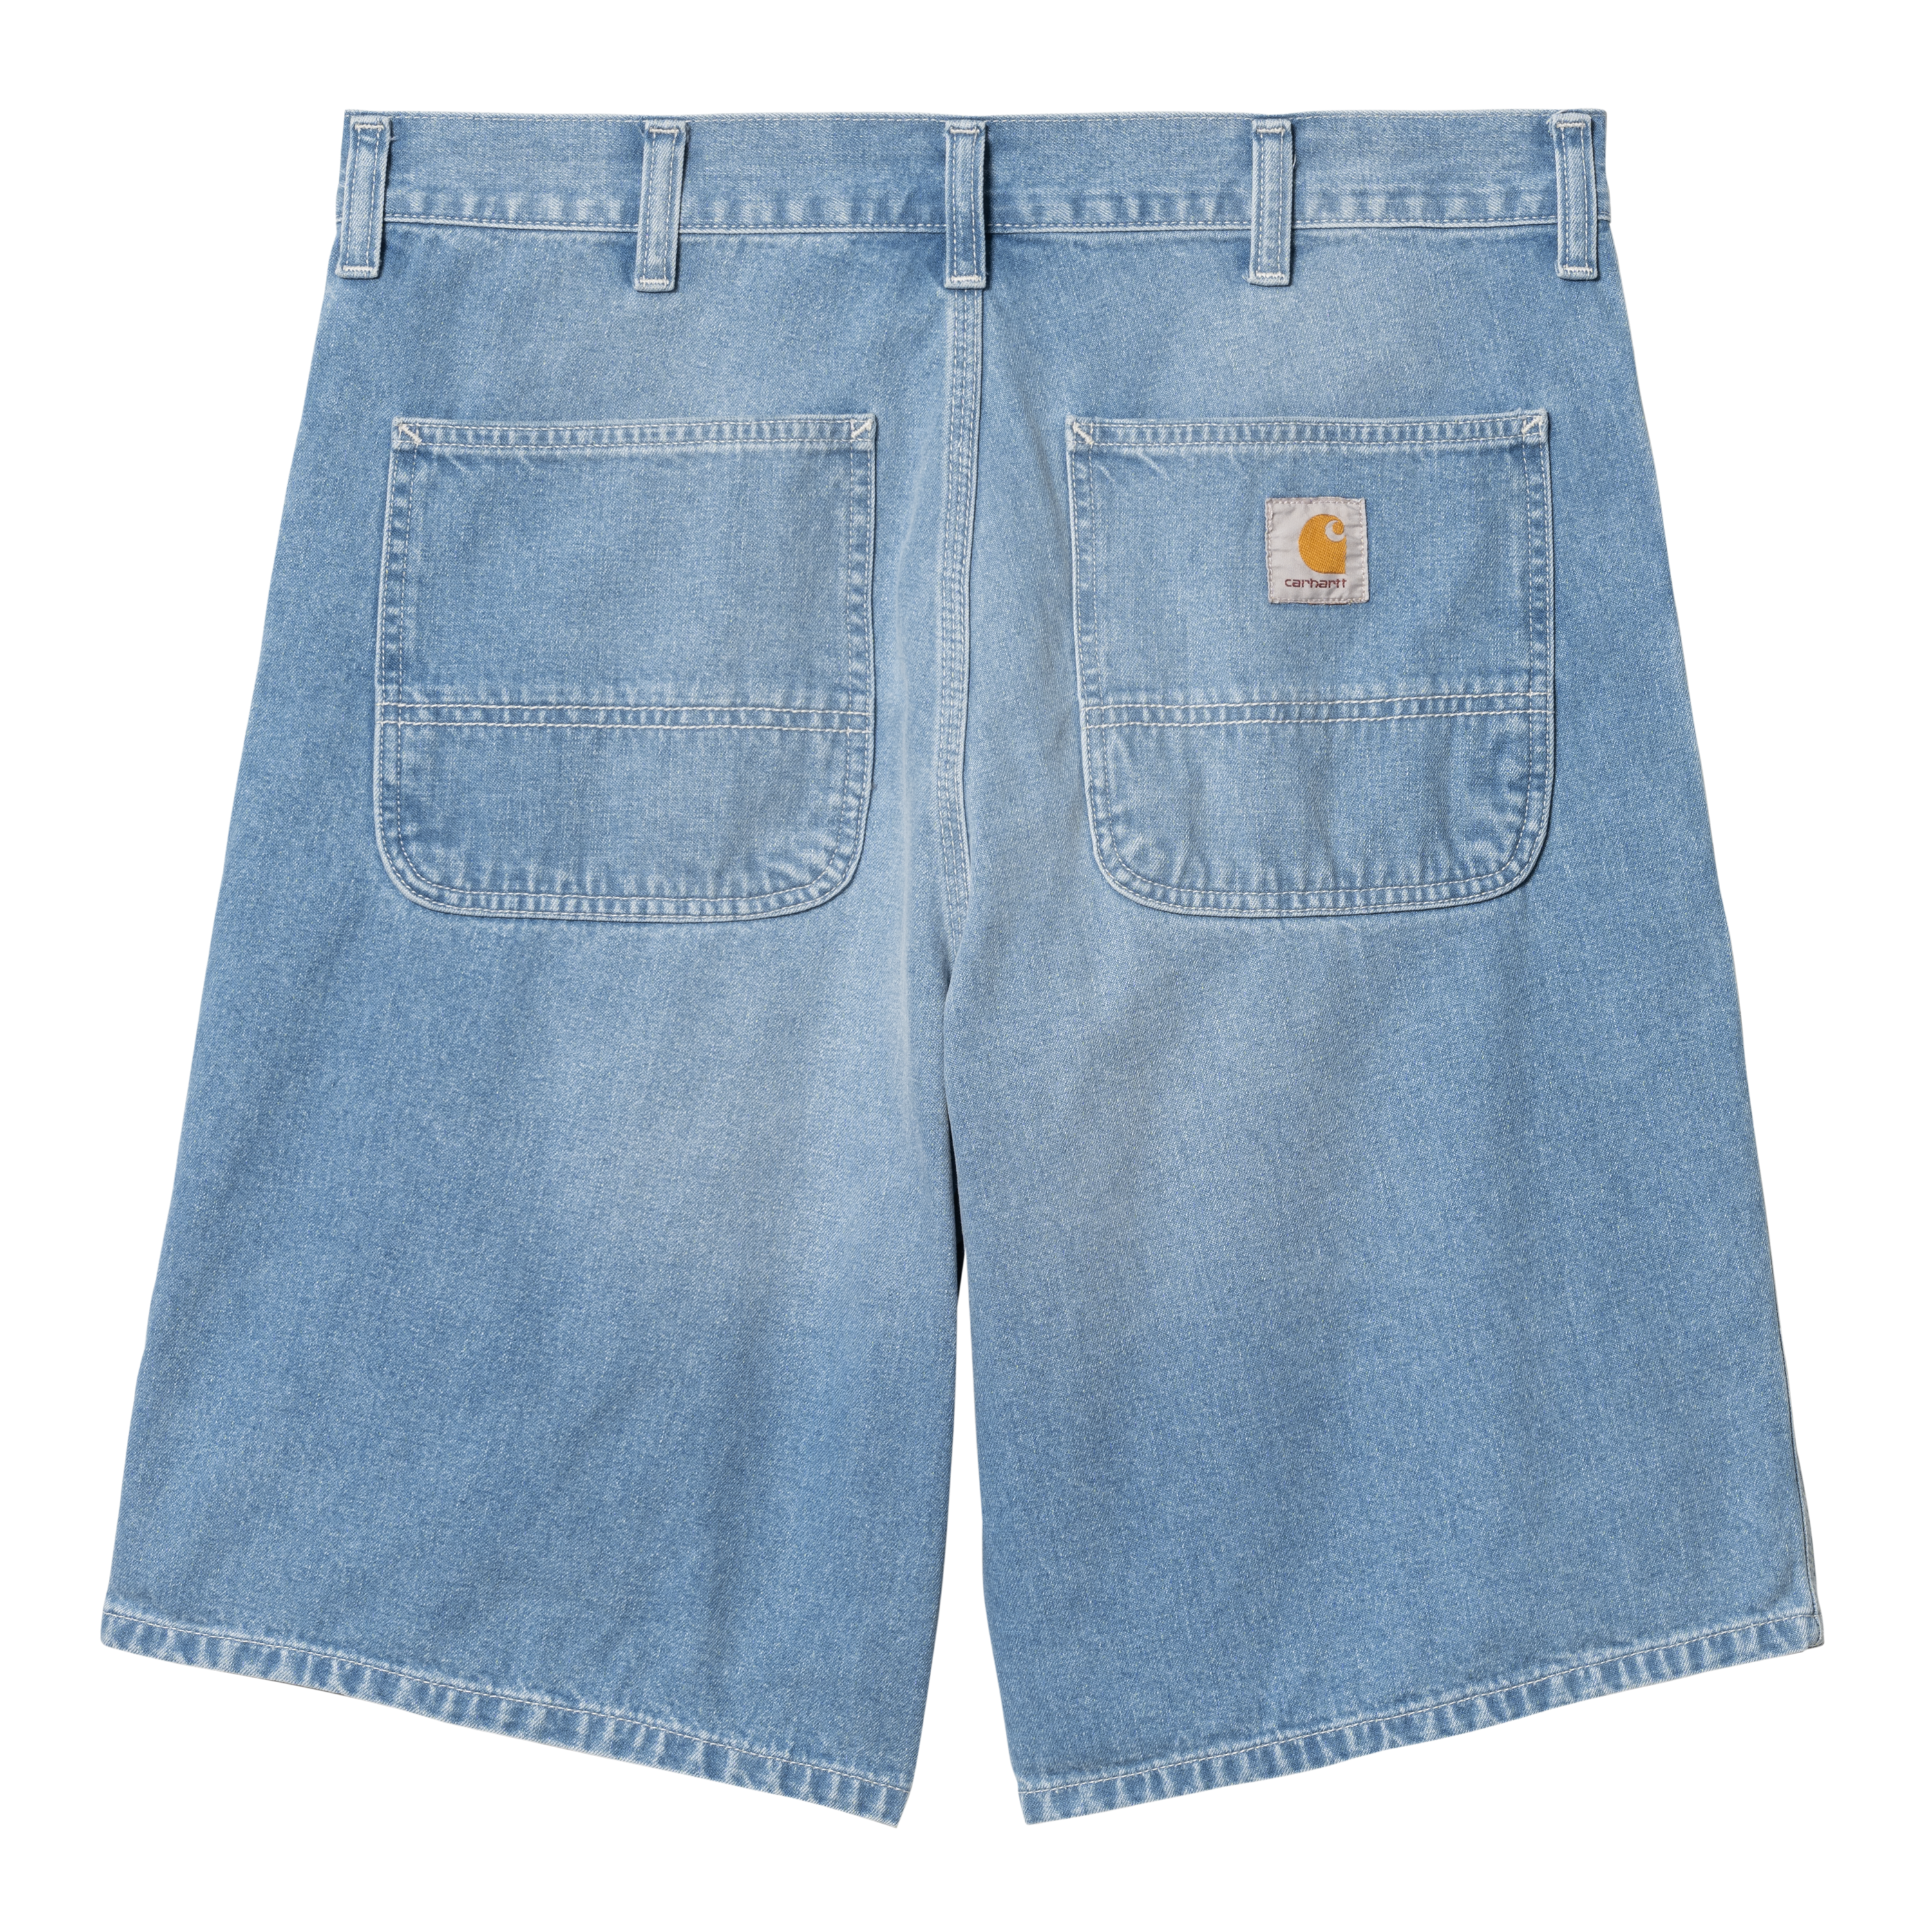 The Carhartt shorts and leggings all women need this summer